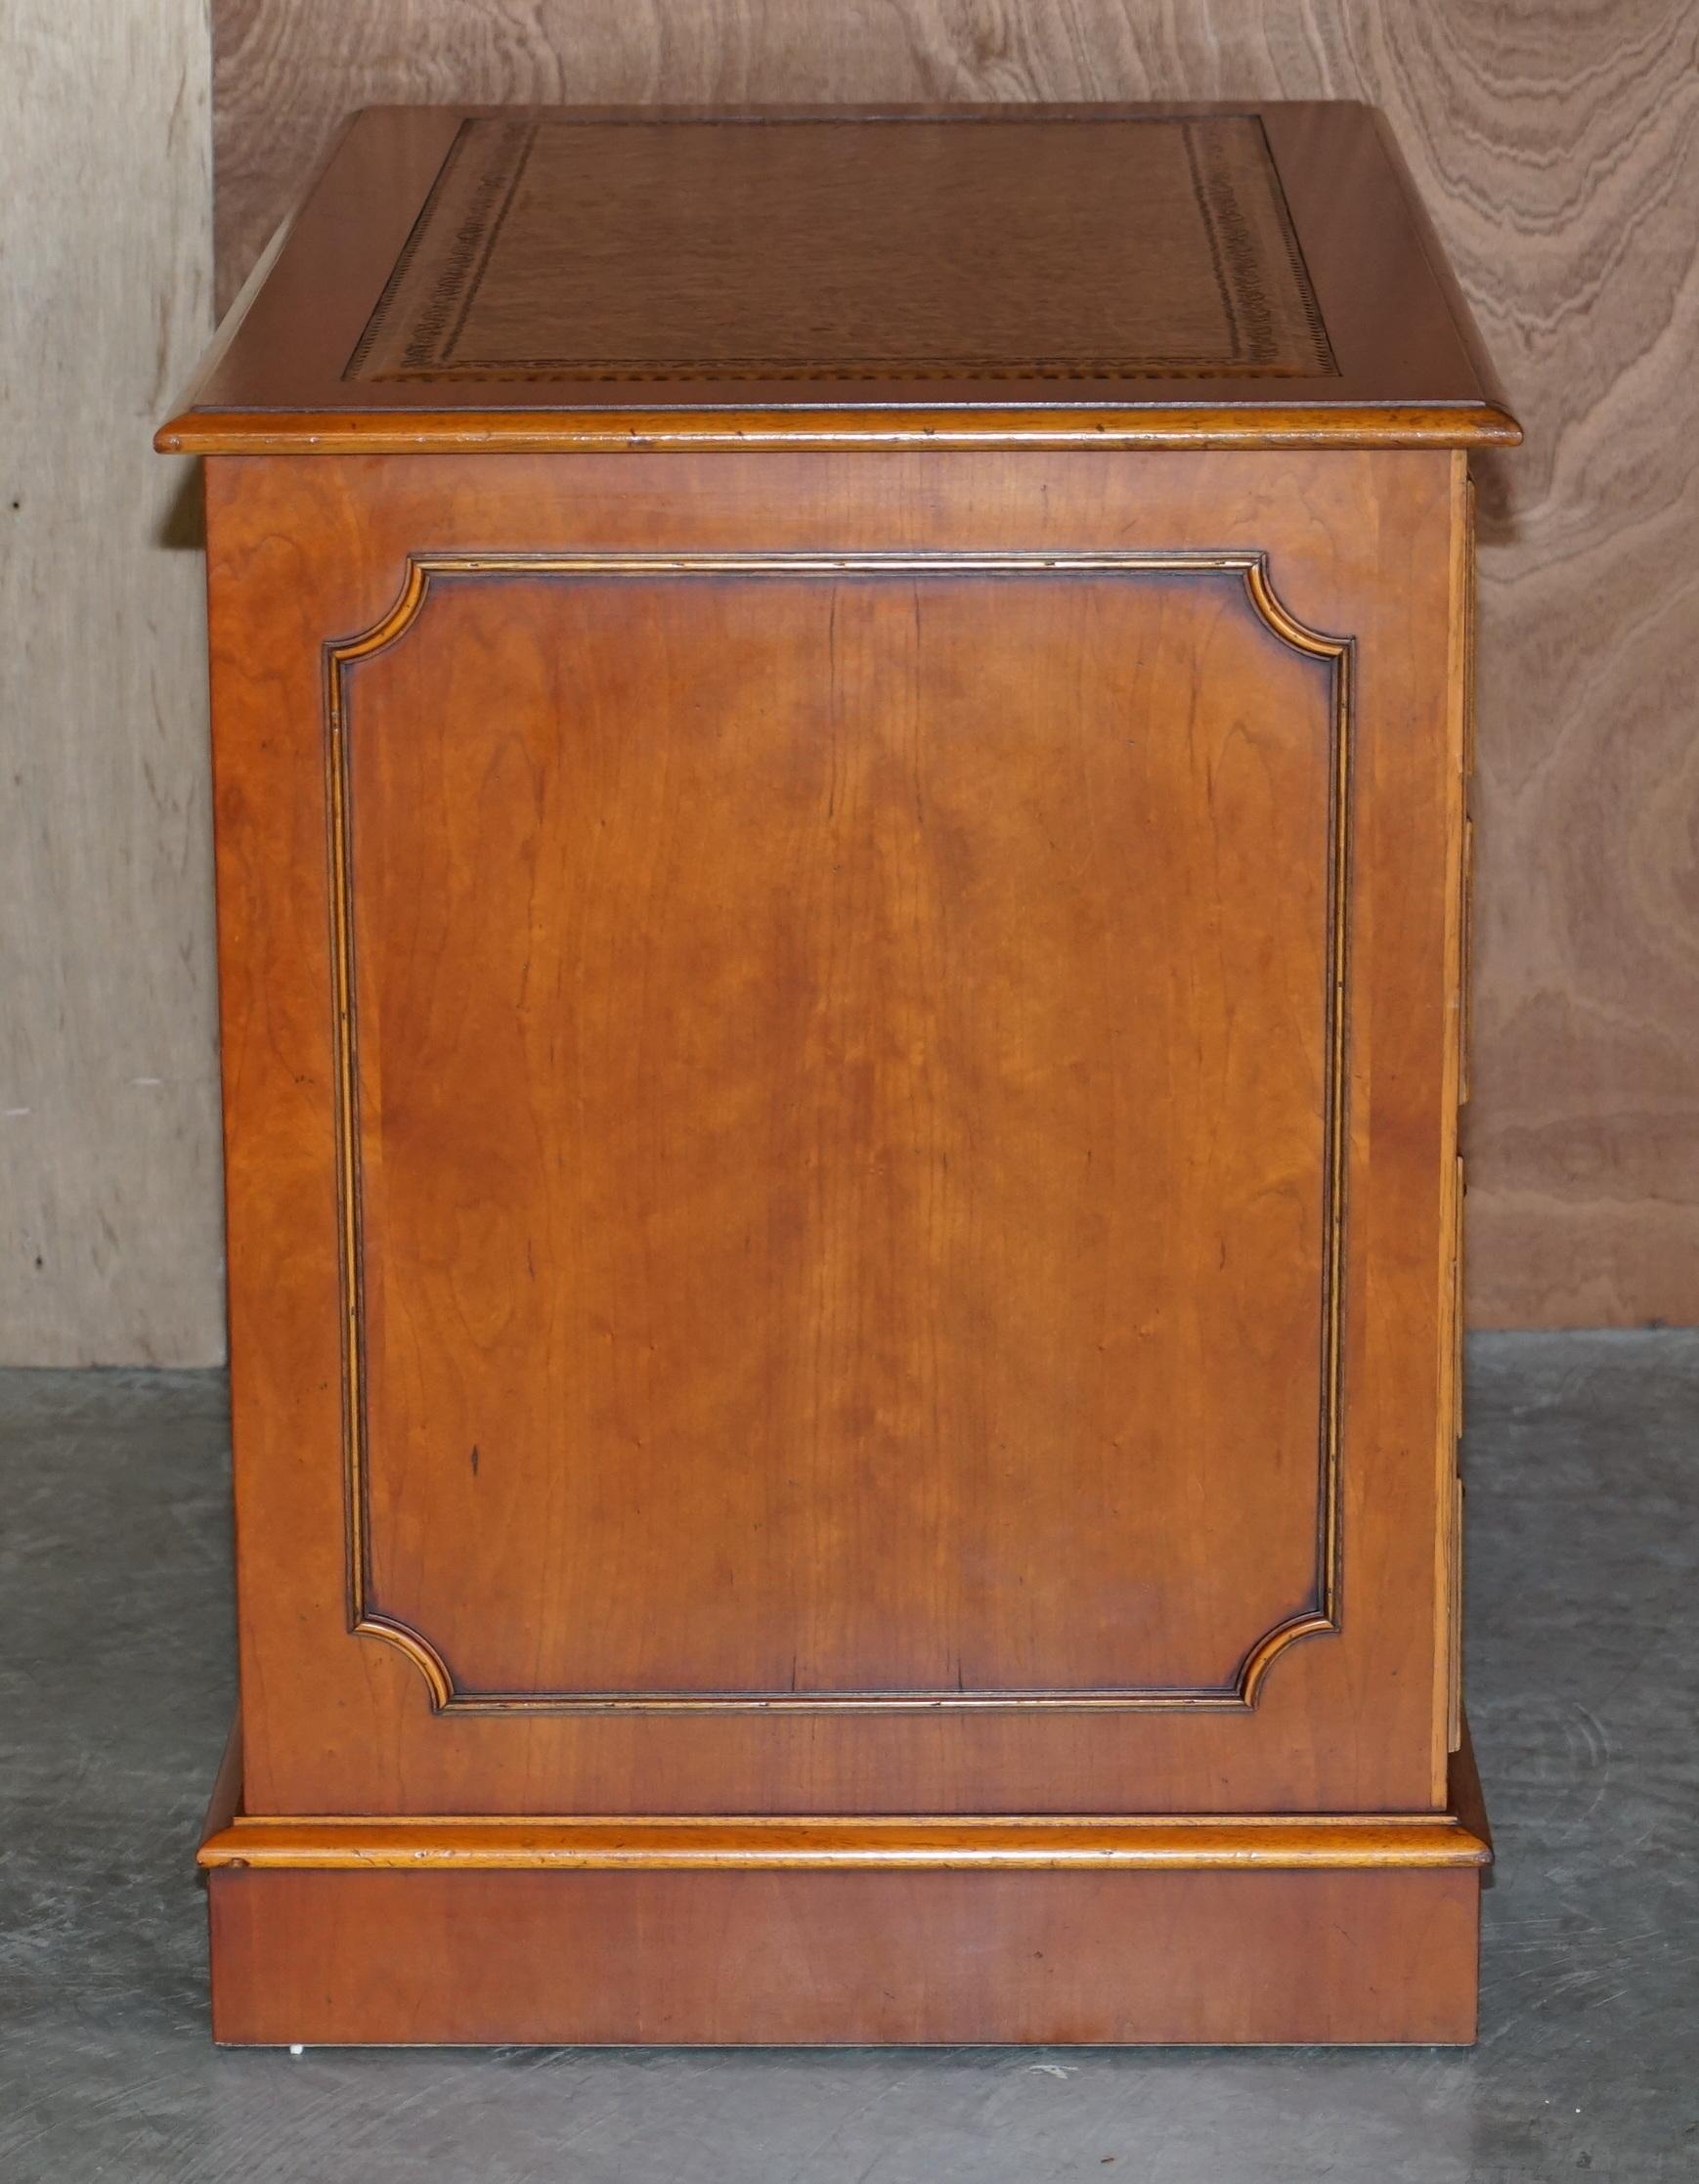 Stunning Yew Wood Brown Leather Double Filing Cabinet for at Home Office Study 4